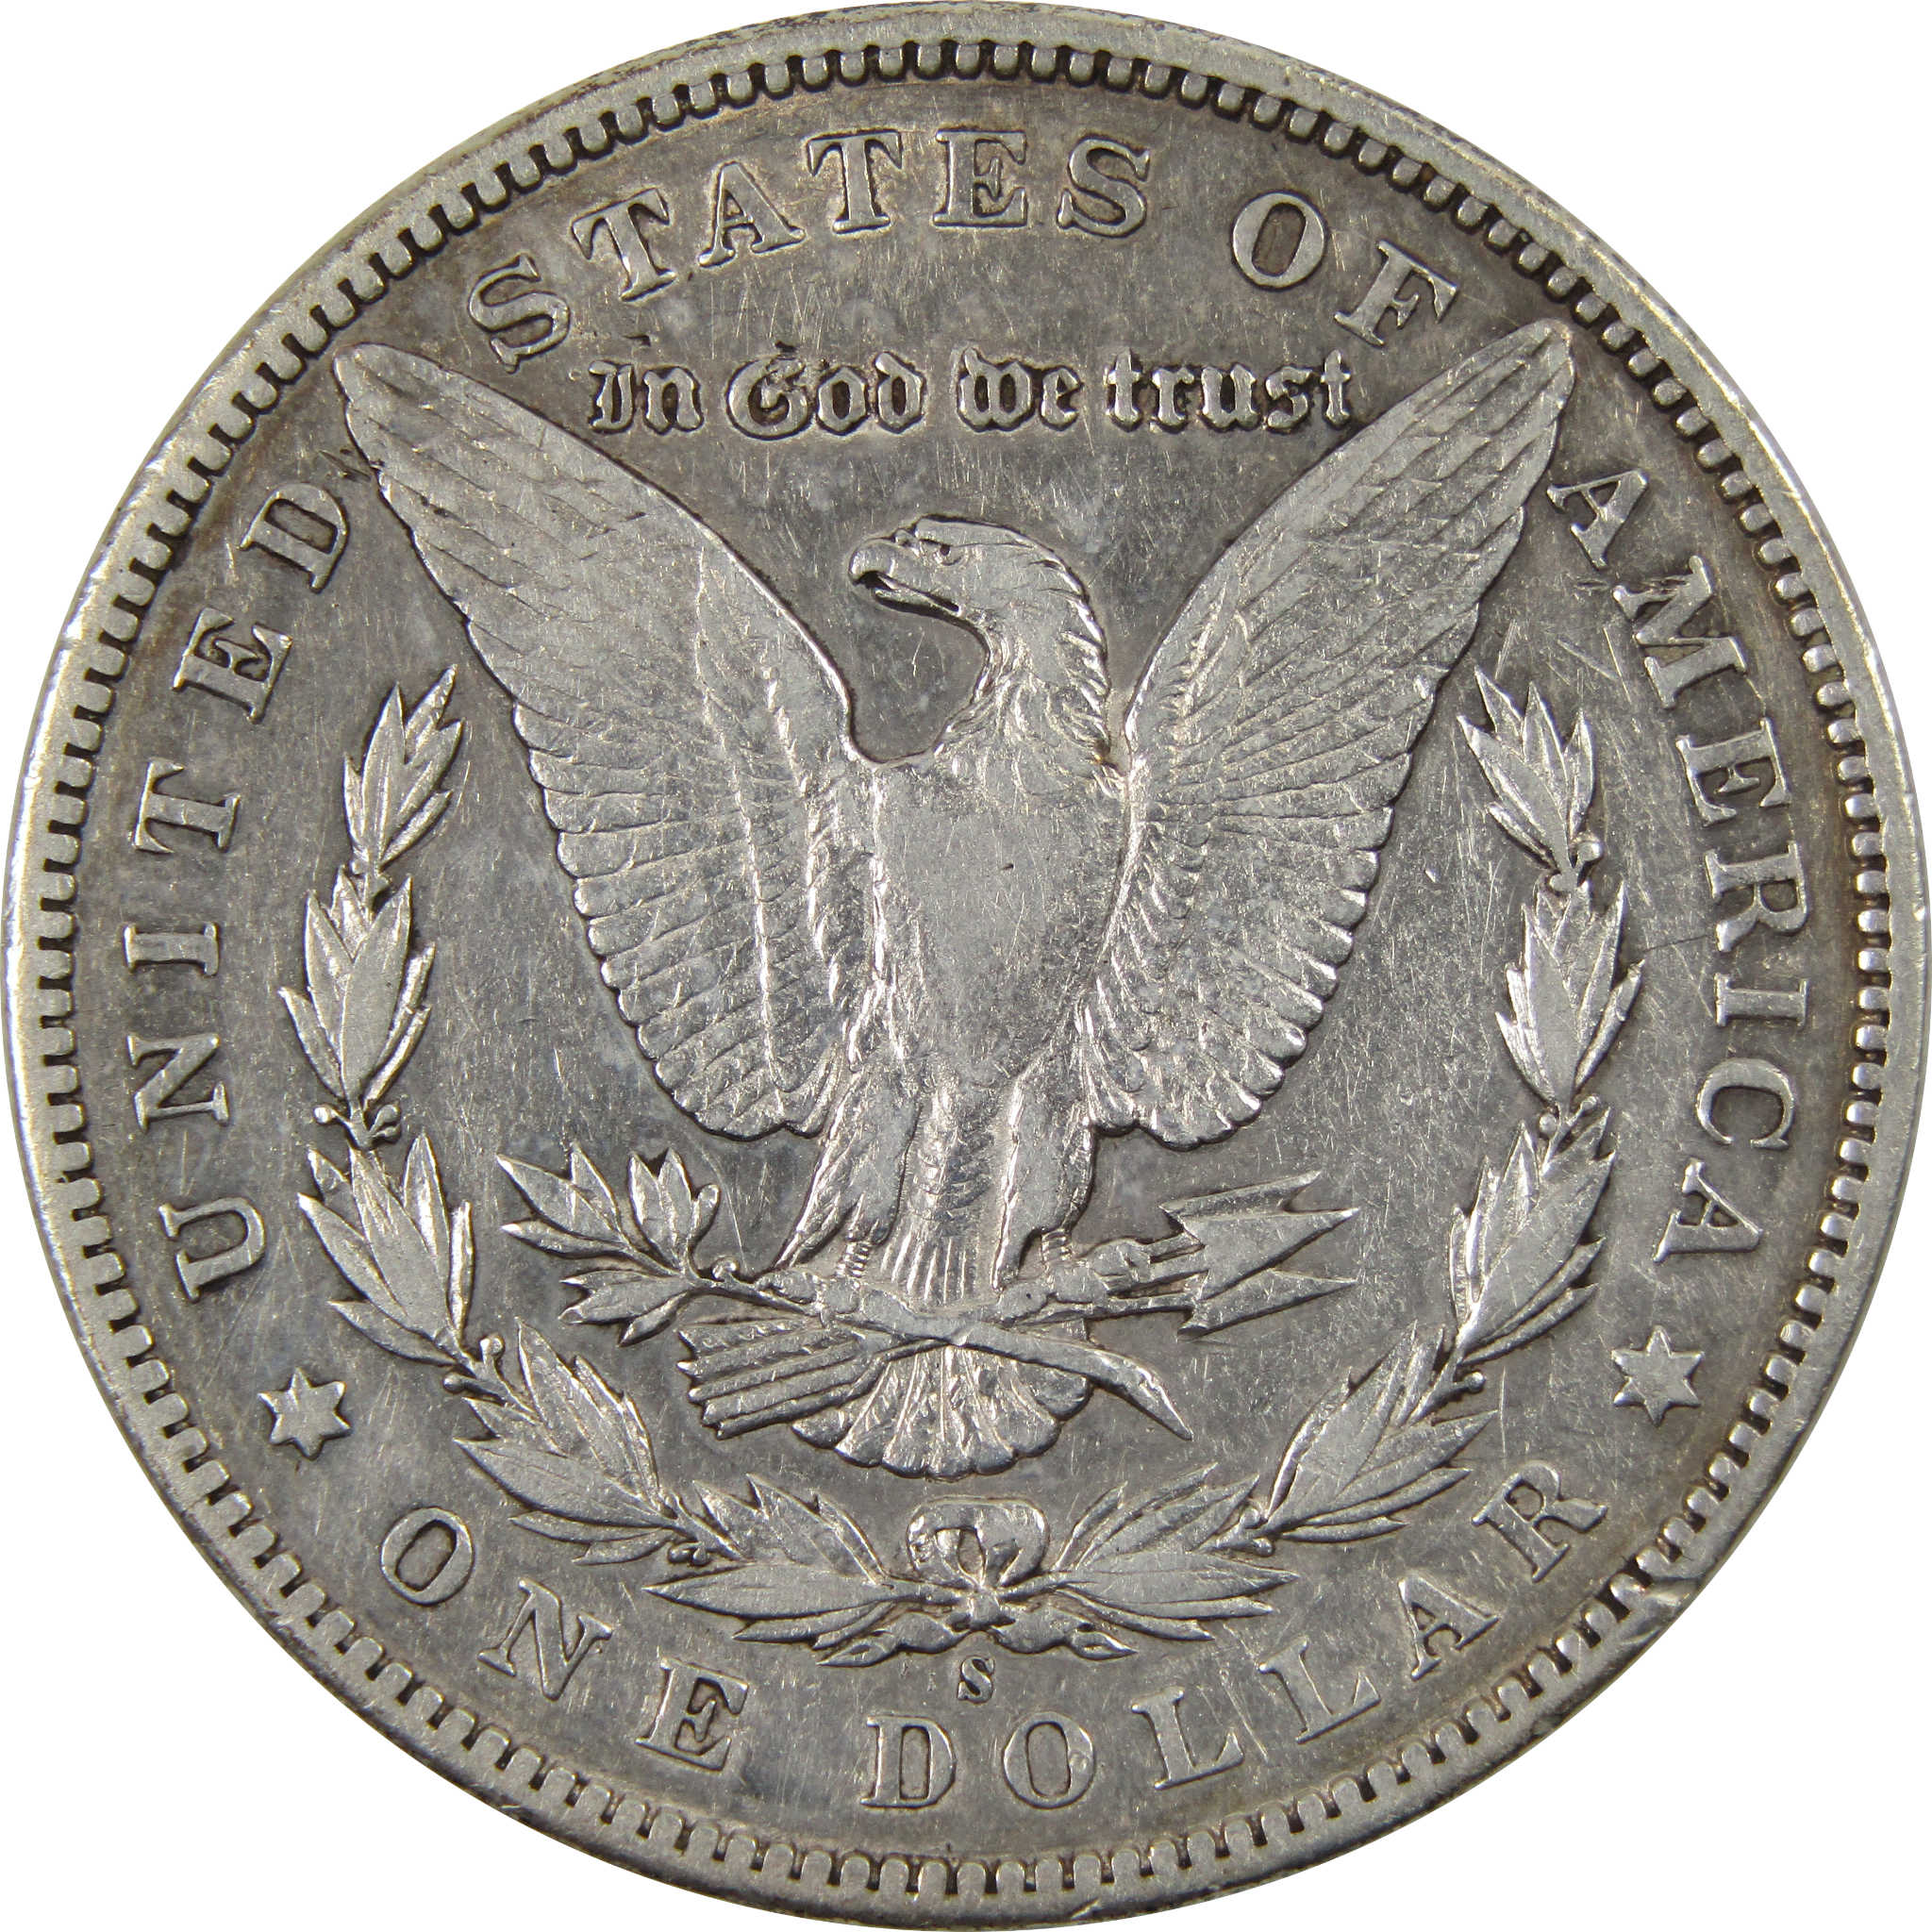 1895 S Morgan Dollar VF/XF Details Silver $1 Coin SKU:I10195 - Morgan coin - Morgan silver dollar - Morgan silver dollar for sale - Profile Coins &amp; Collectibles